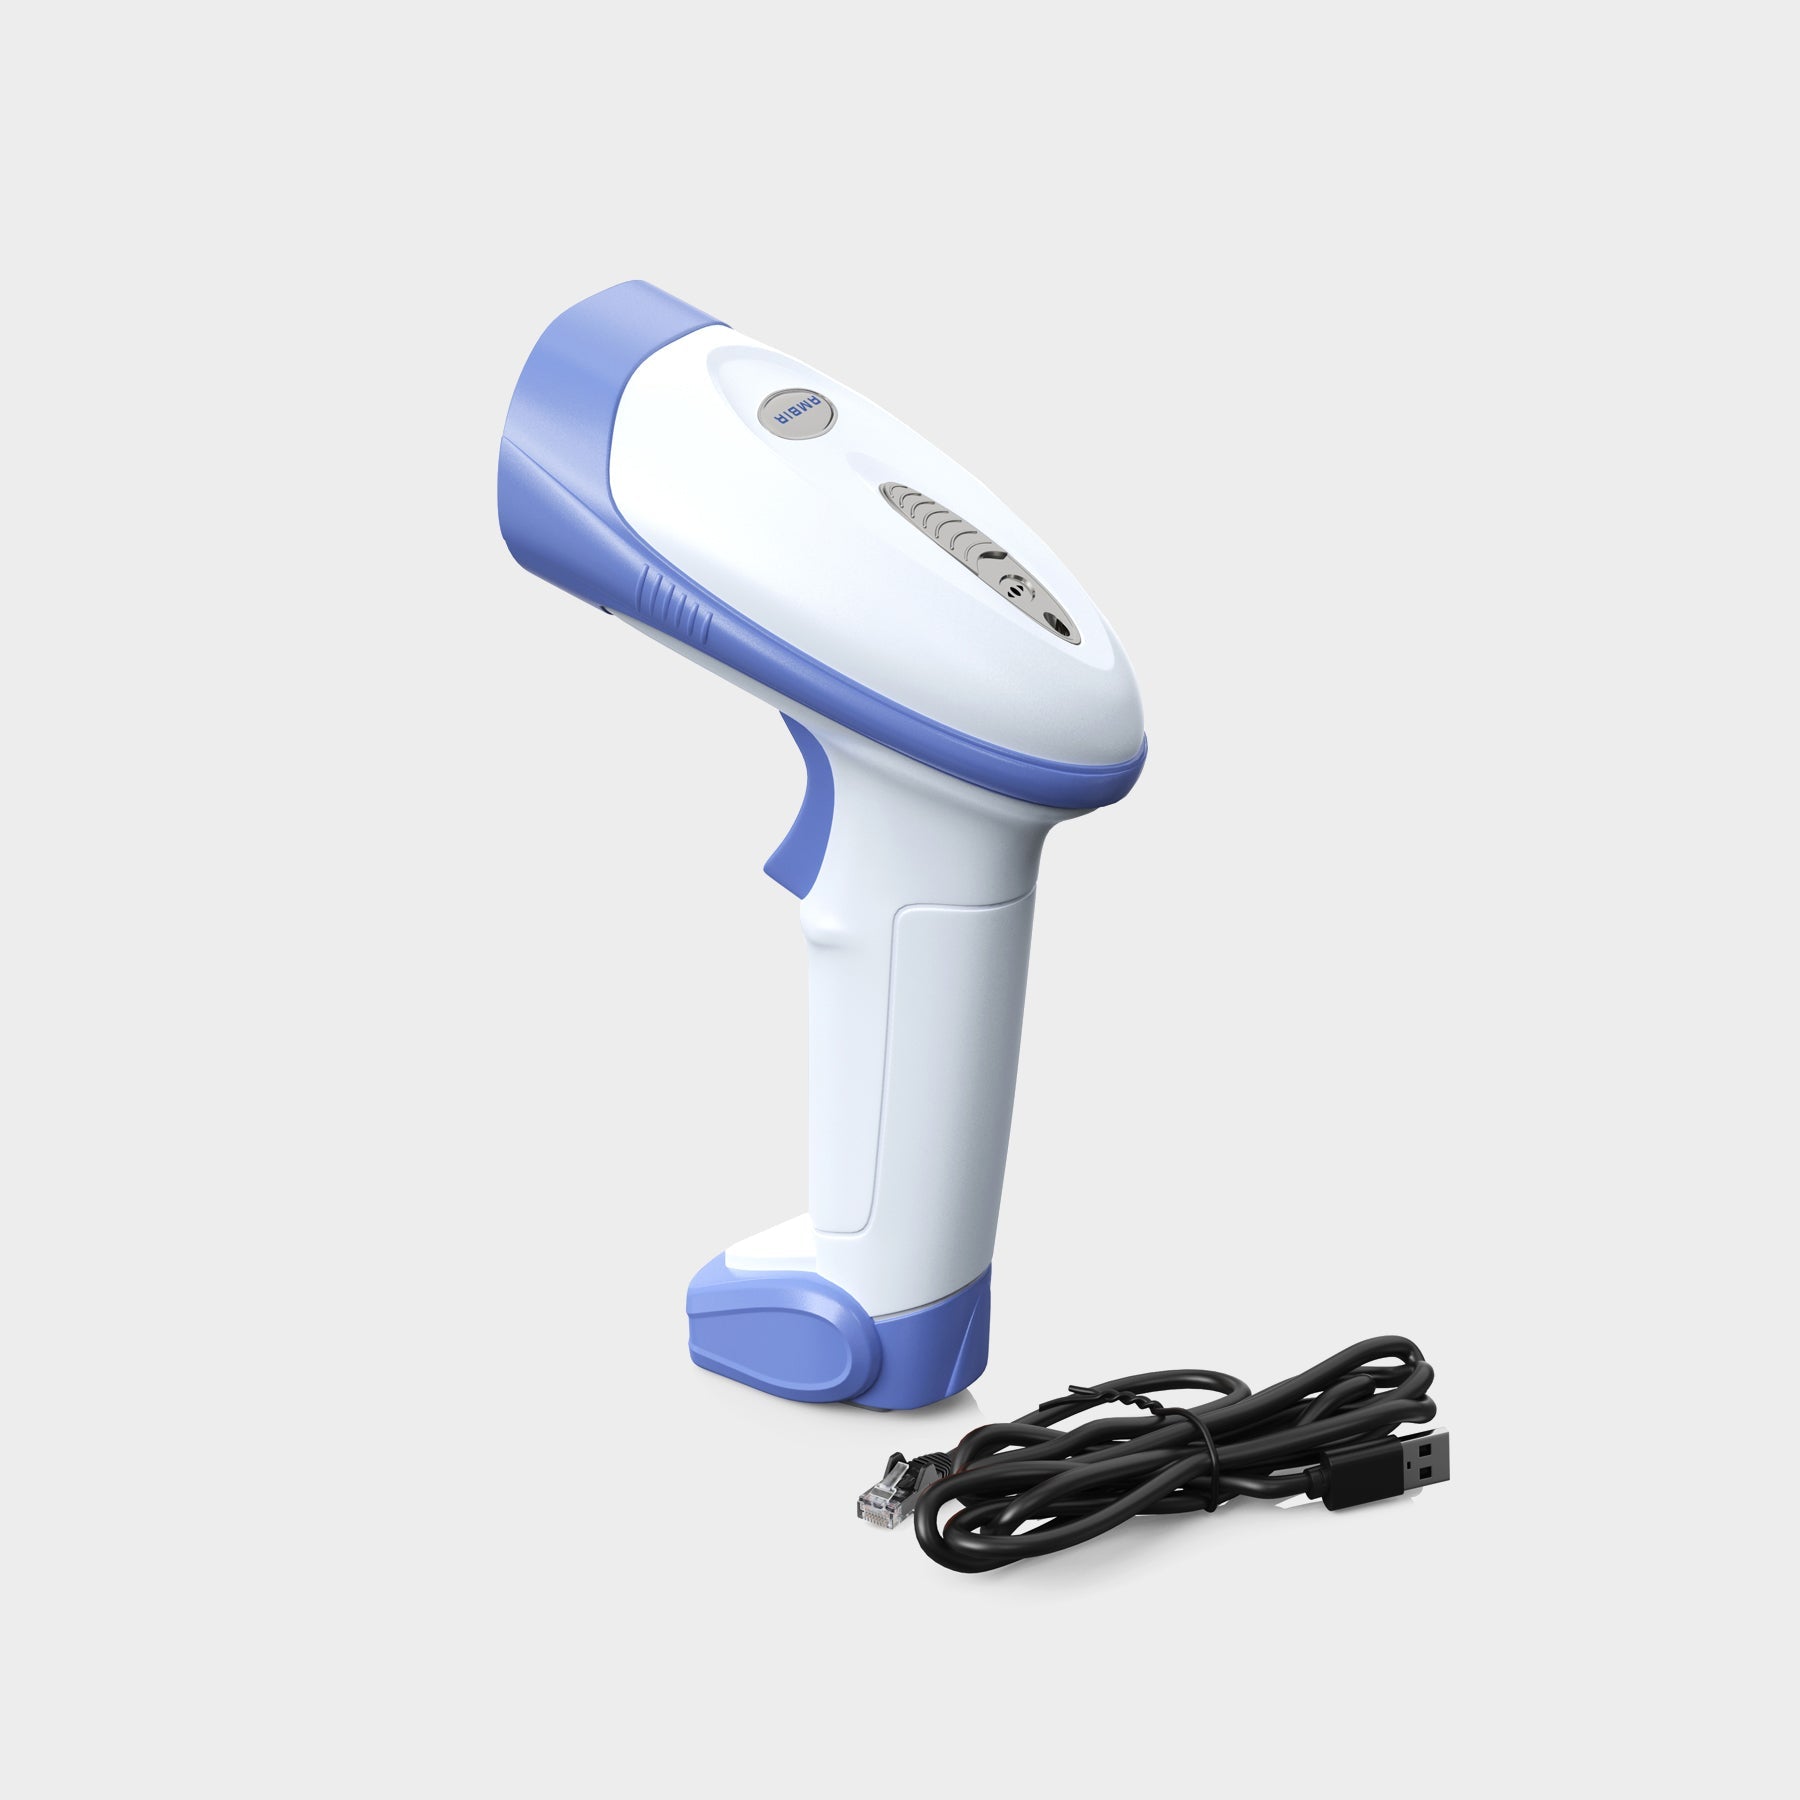 AMBIR BR100 USB Barcode Scanner - White/Blue for Compulink (BR100-CWH)